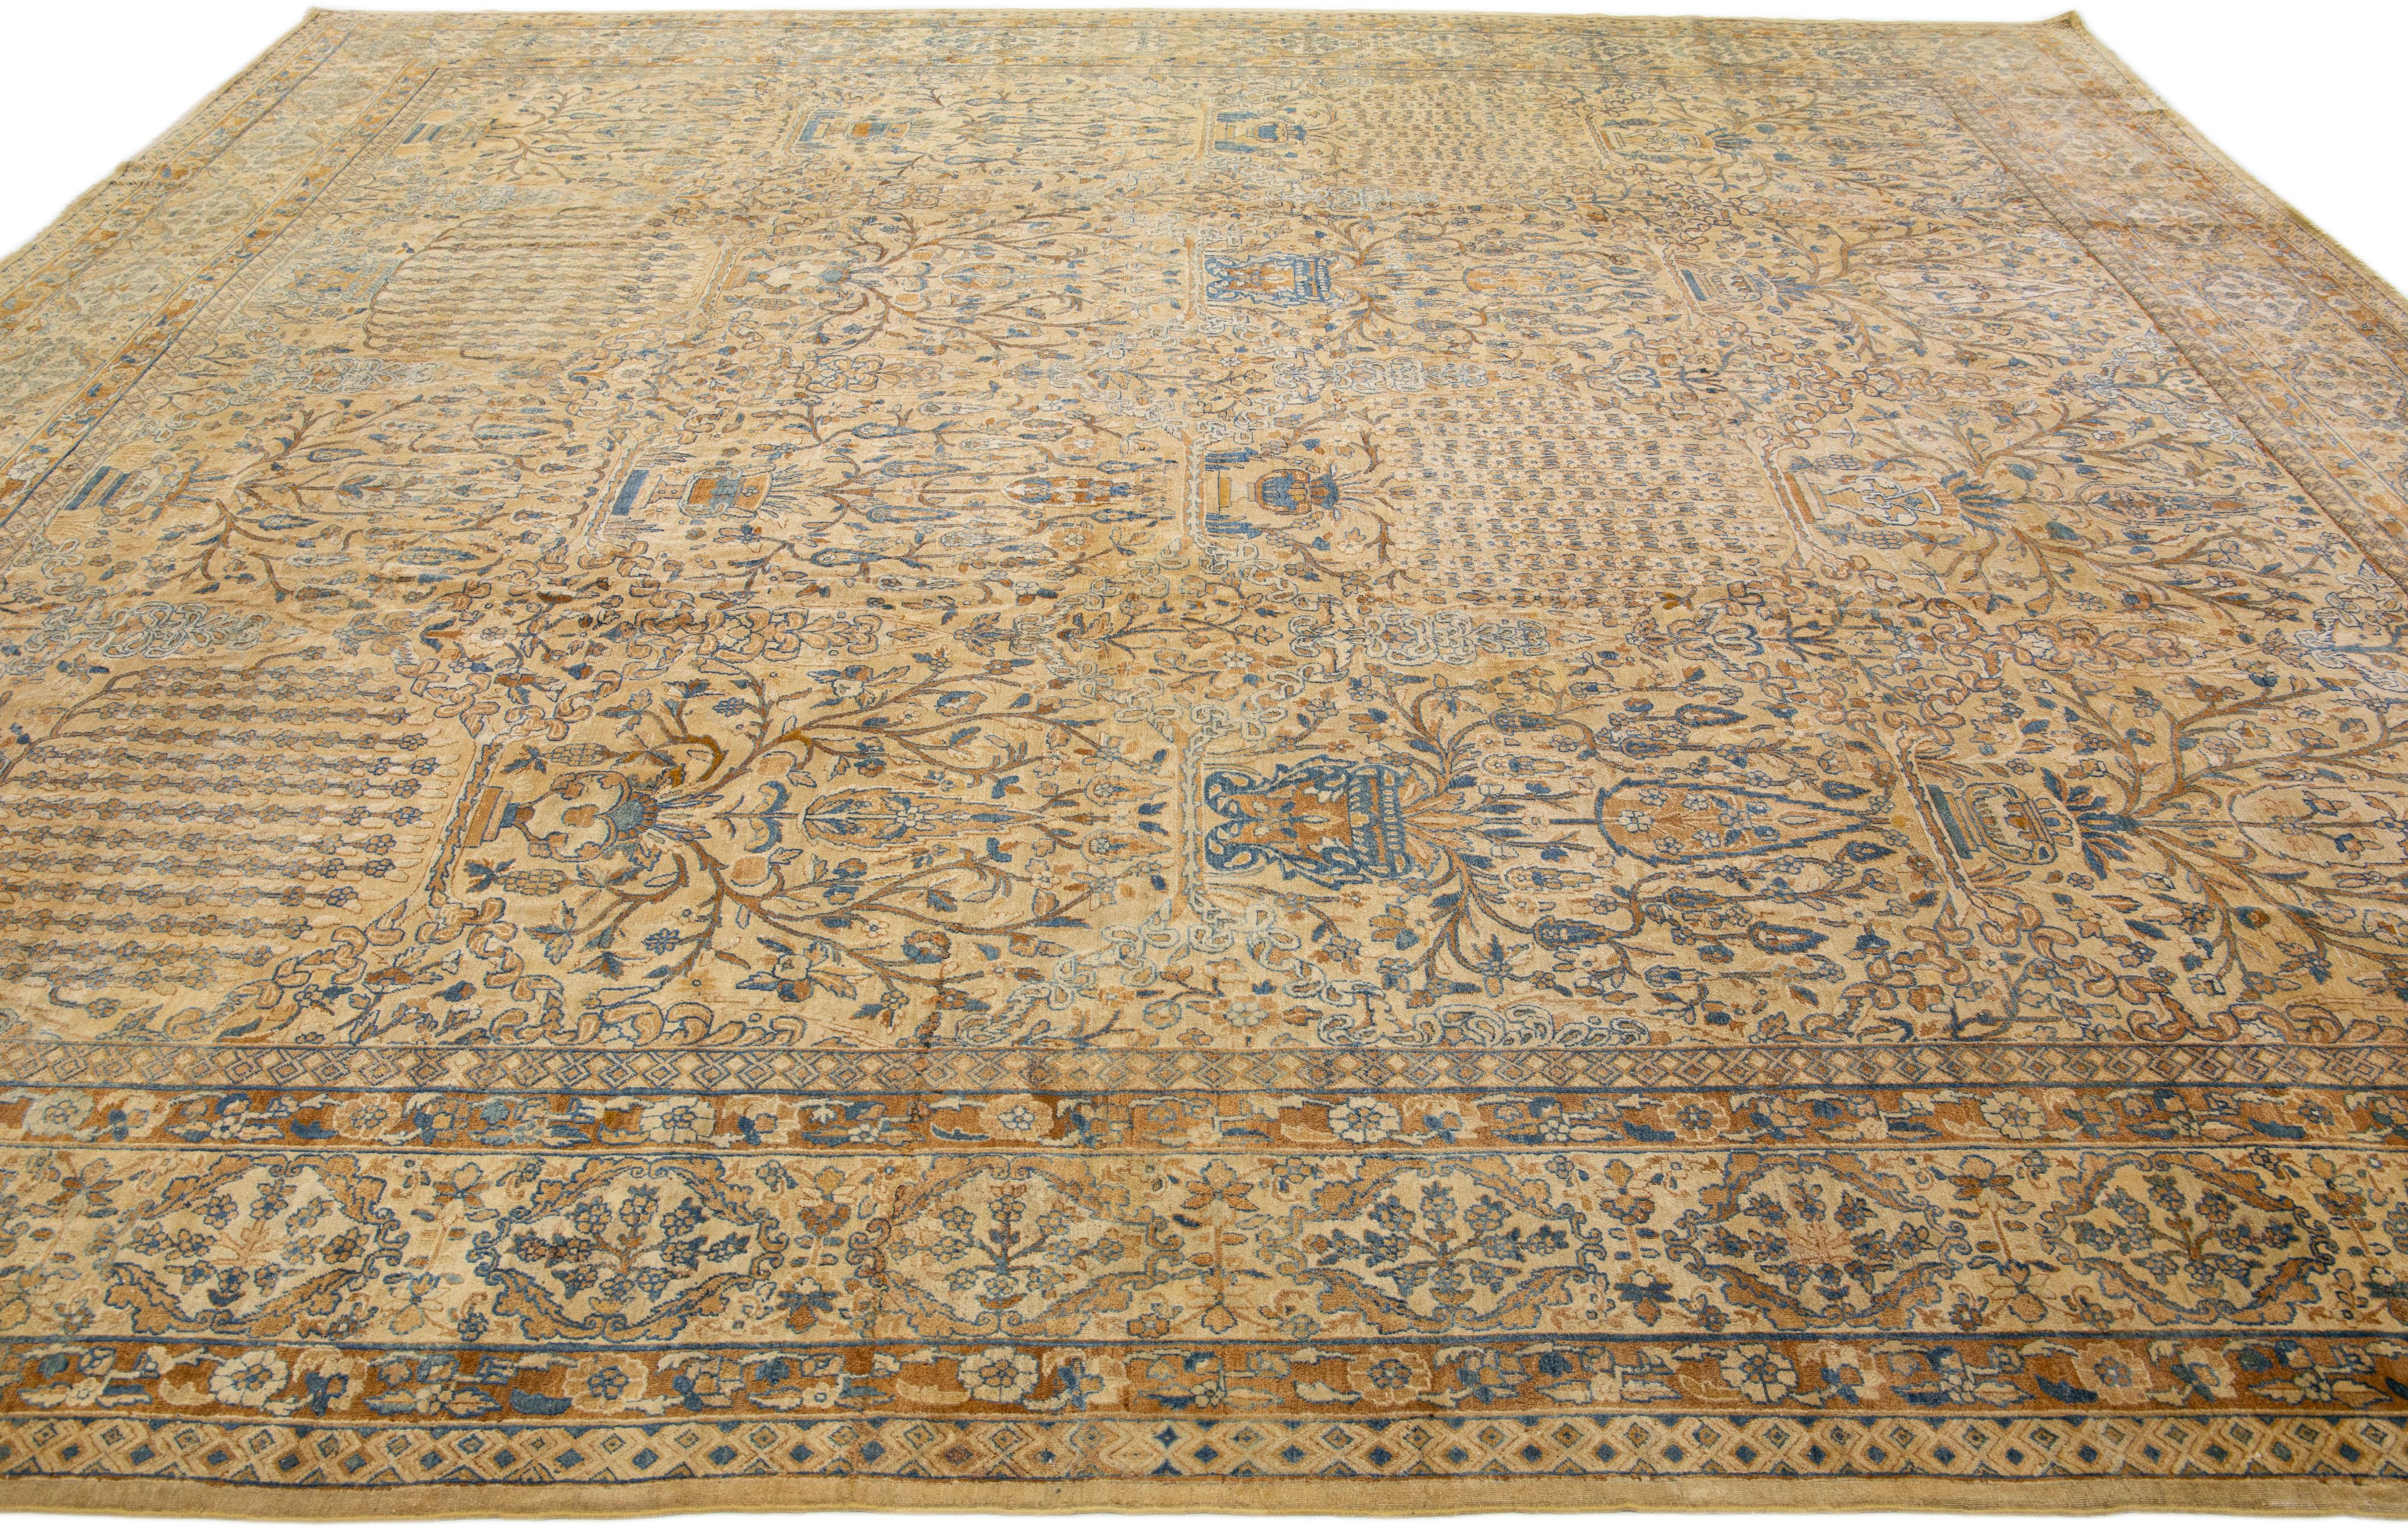 Early 20th Century Antique Persian Kerman Handmade All-Over Floral Goldenrod Wool Rug For Sale